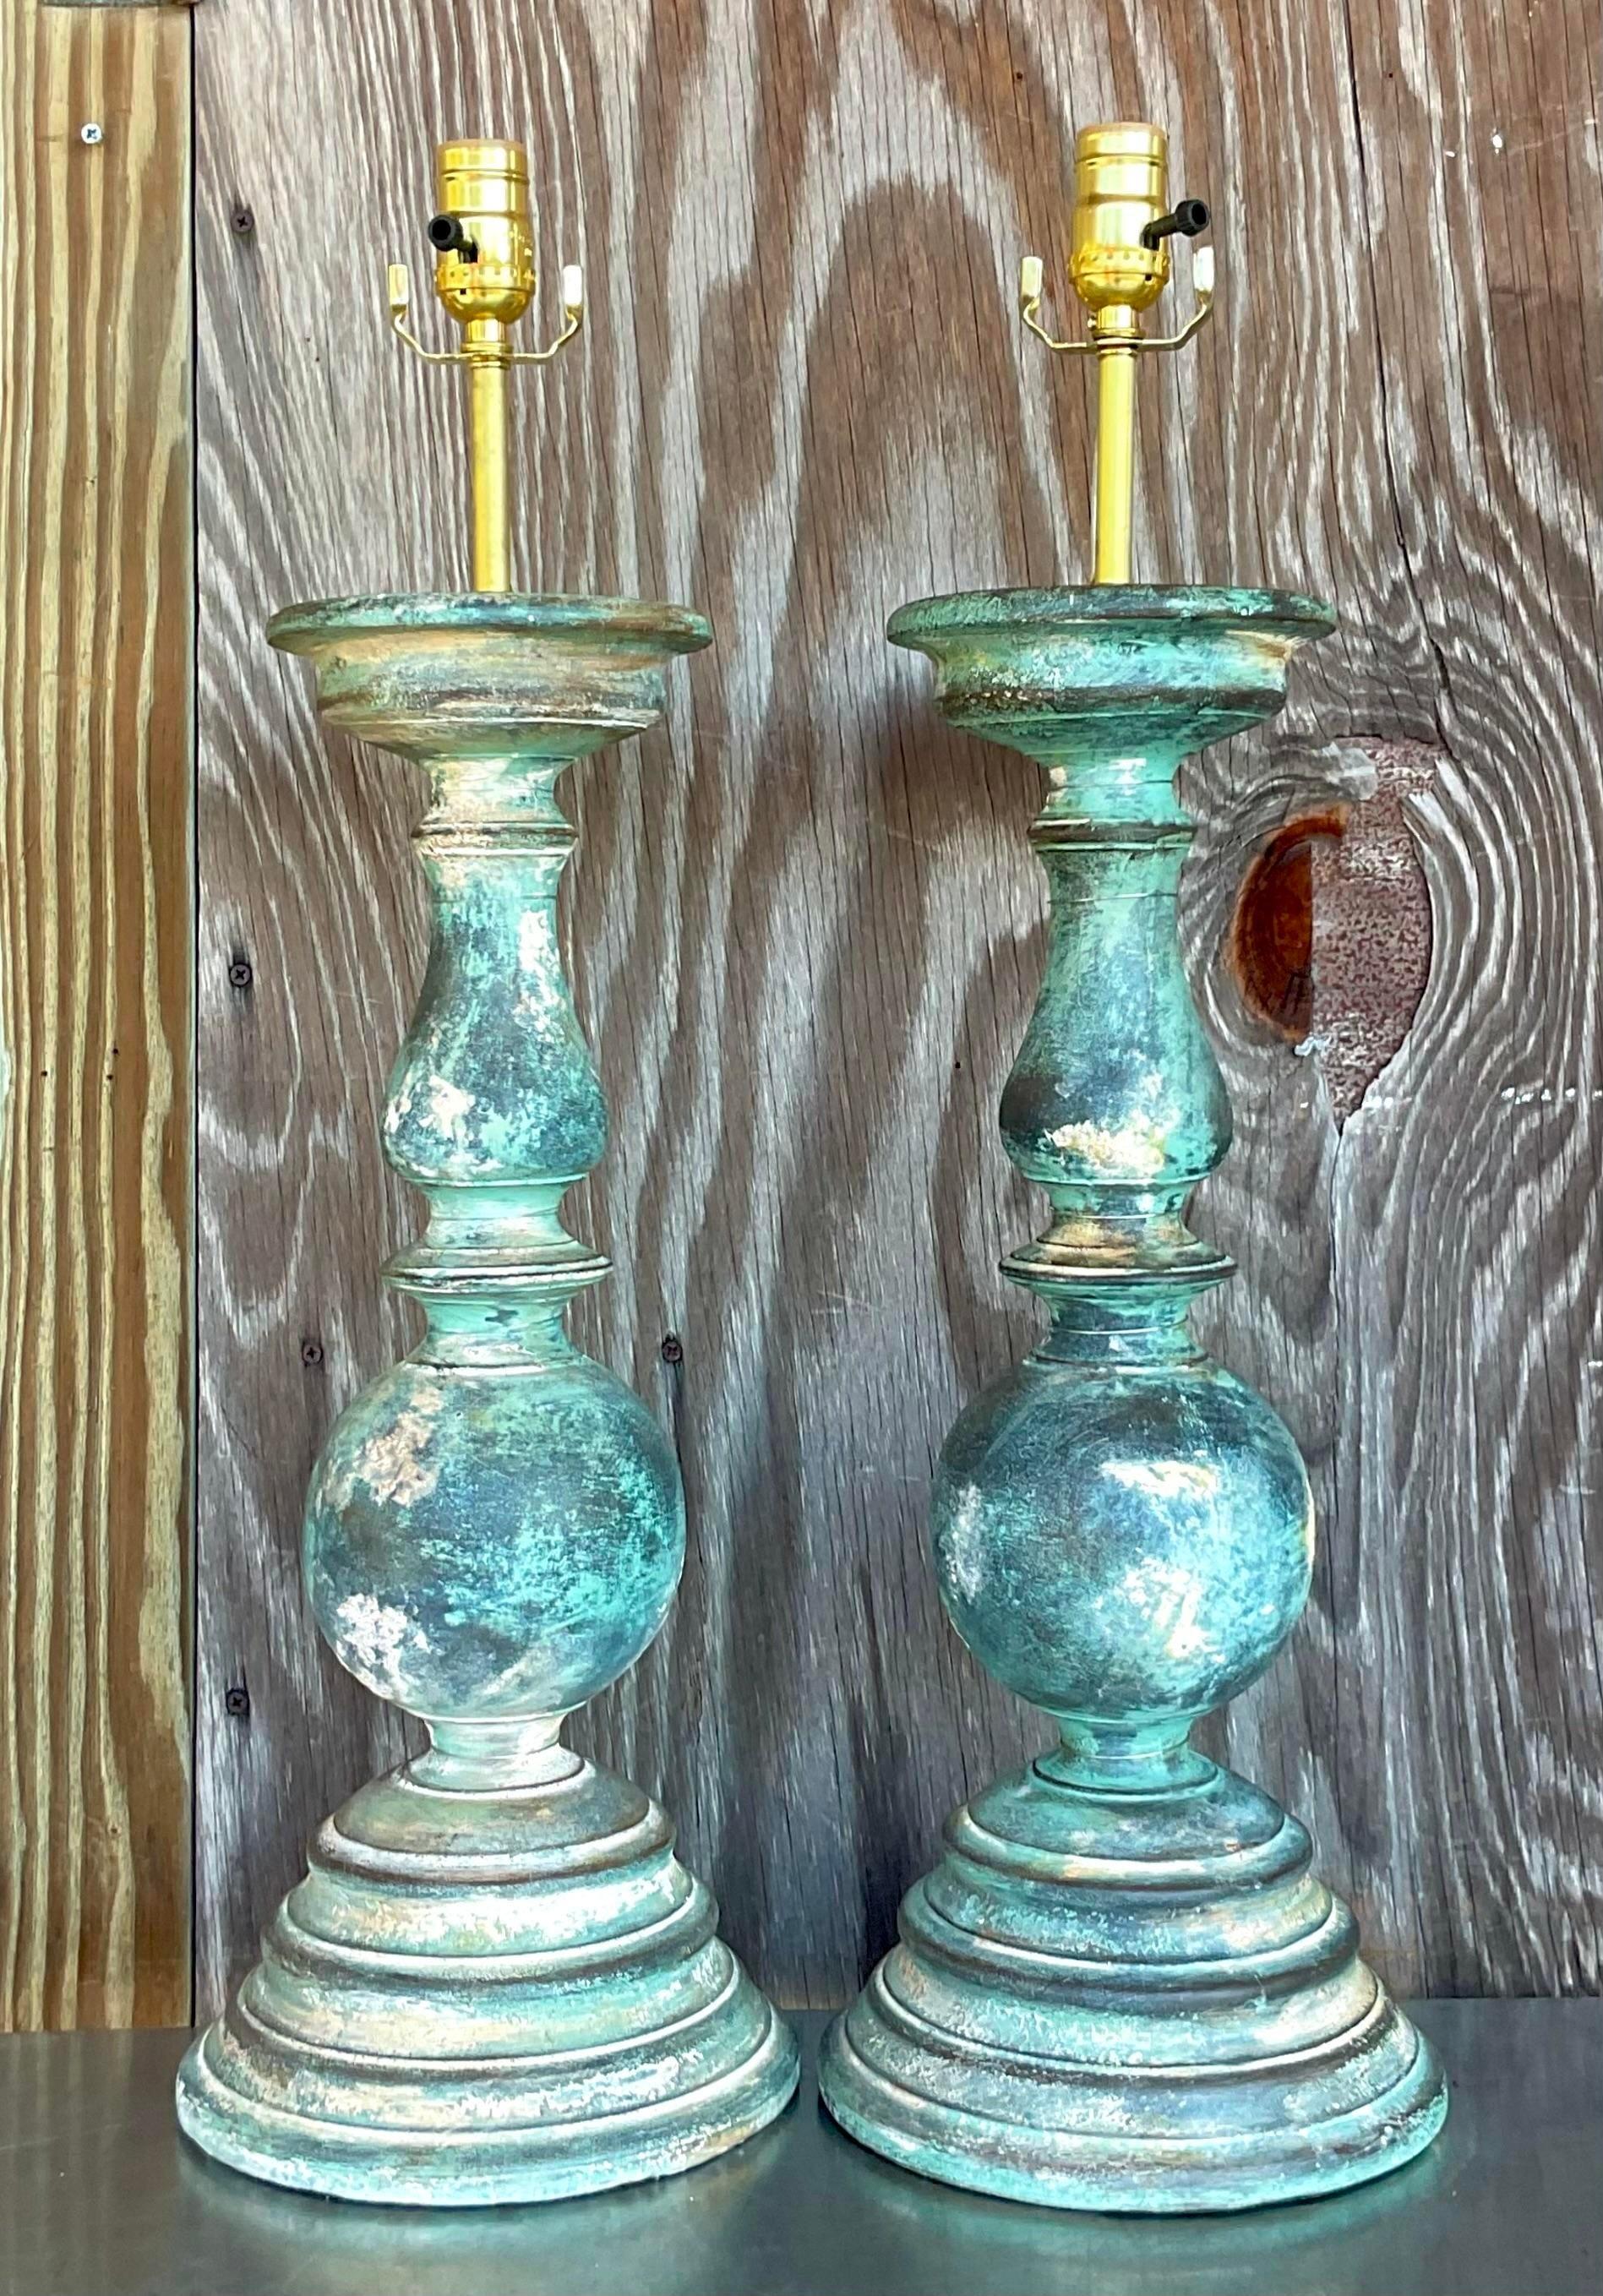 Mid-Century Modern Vintage Boho Hand Painted Balustrade Lamps - a Pair For Sale